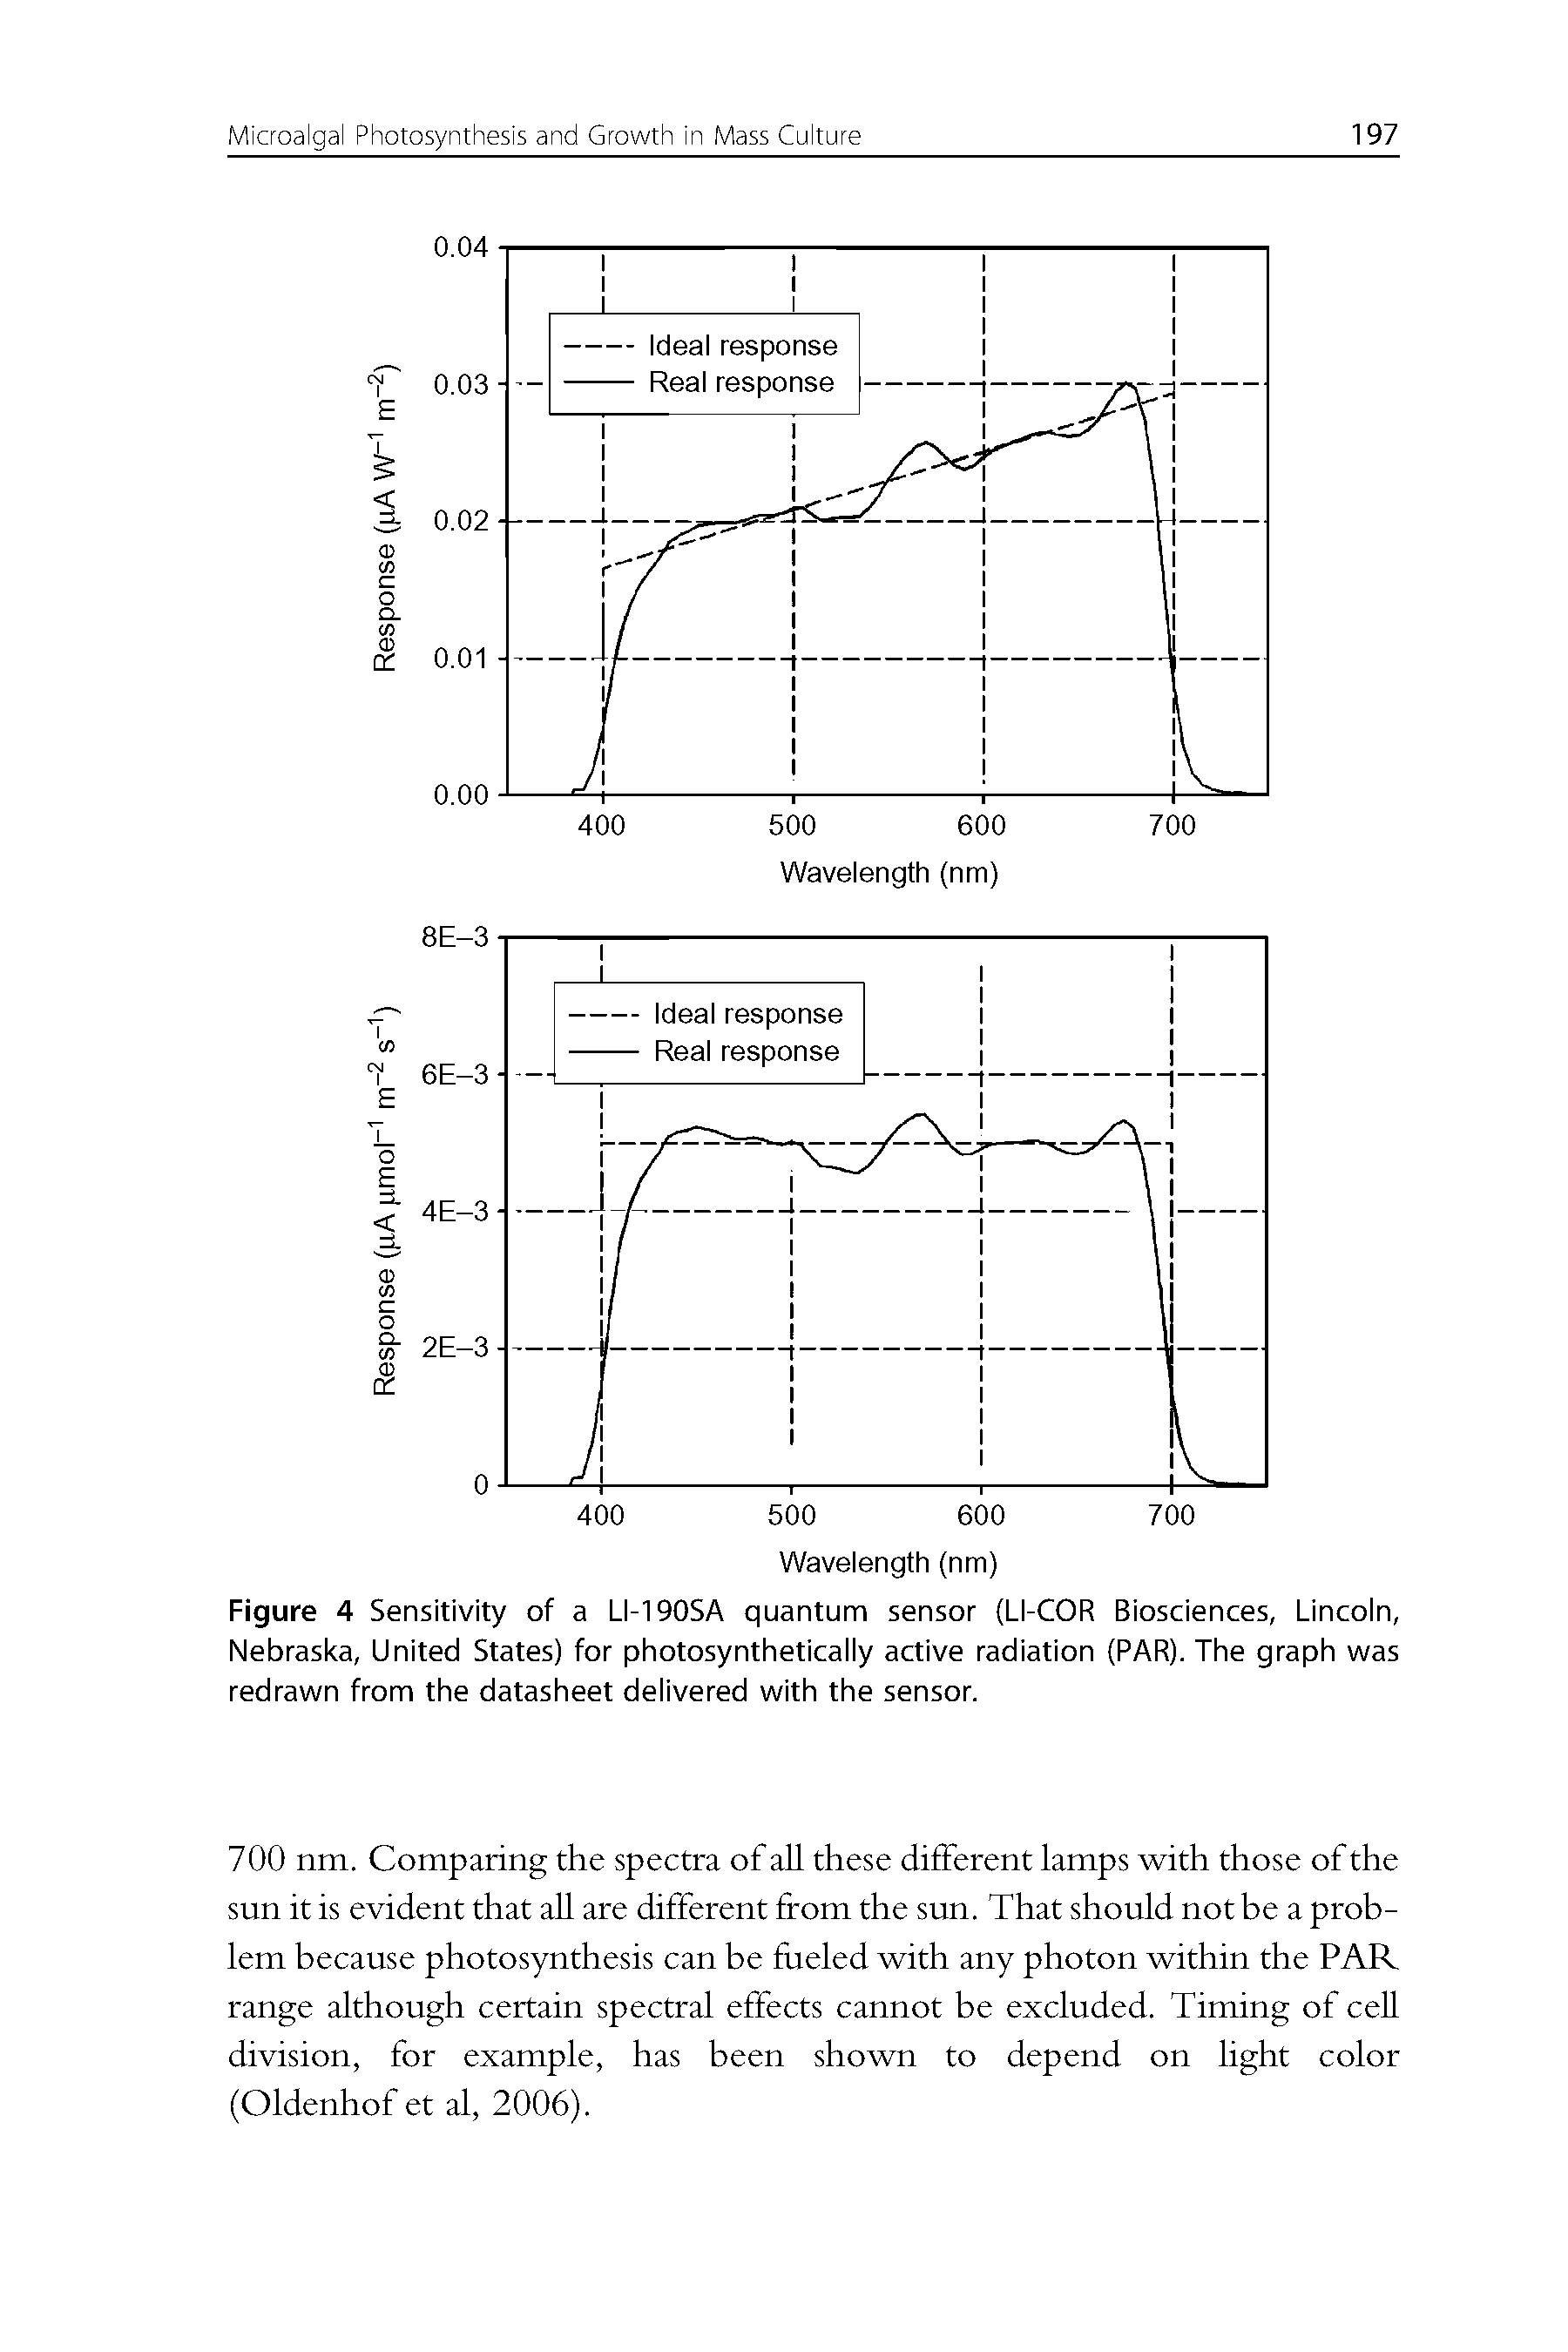 Figure 4 Sensitivity of a LI-190SA quantum sensor (LI-COR Biosciences, Lincoln, Nebraska, United States) for photosynthetically active radiation (PAR). The graph was redrawn from the datasheet delivered with the sensor.